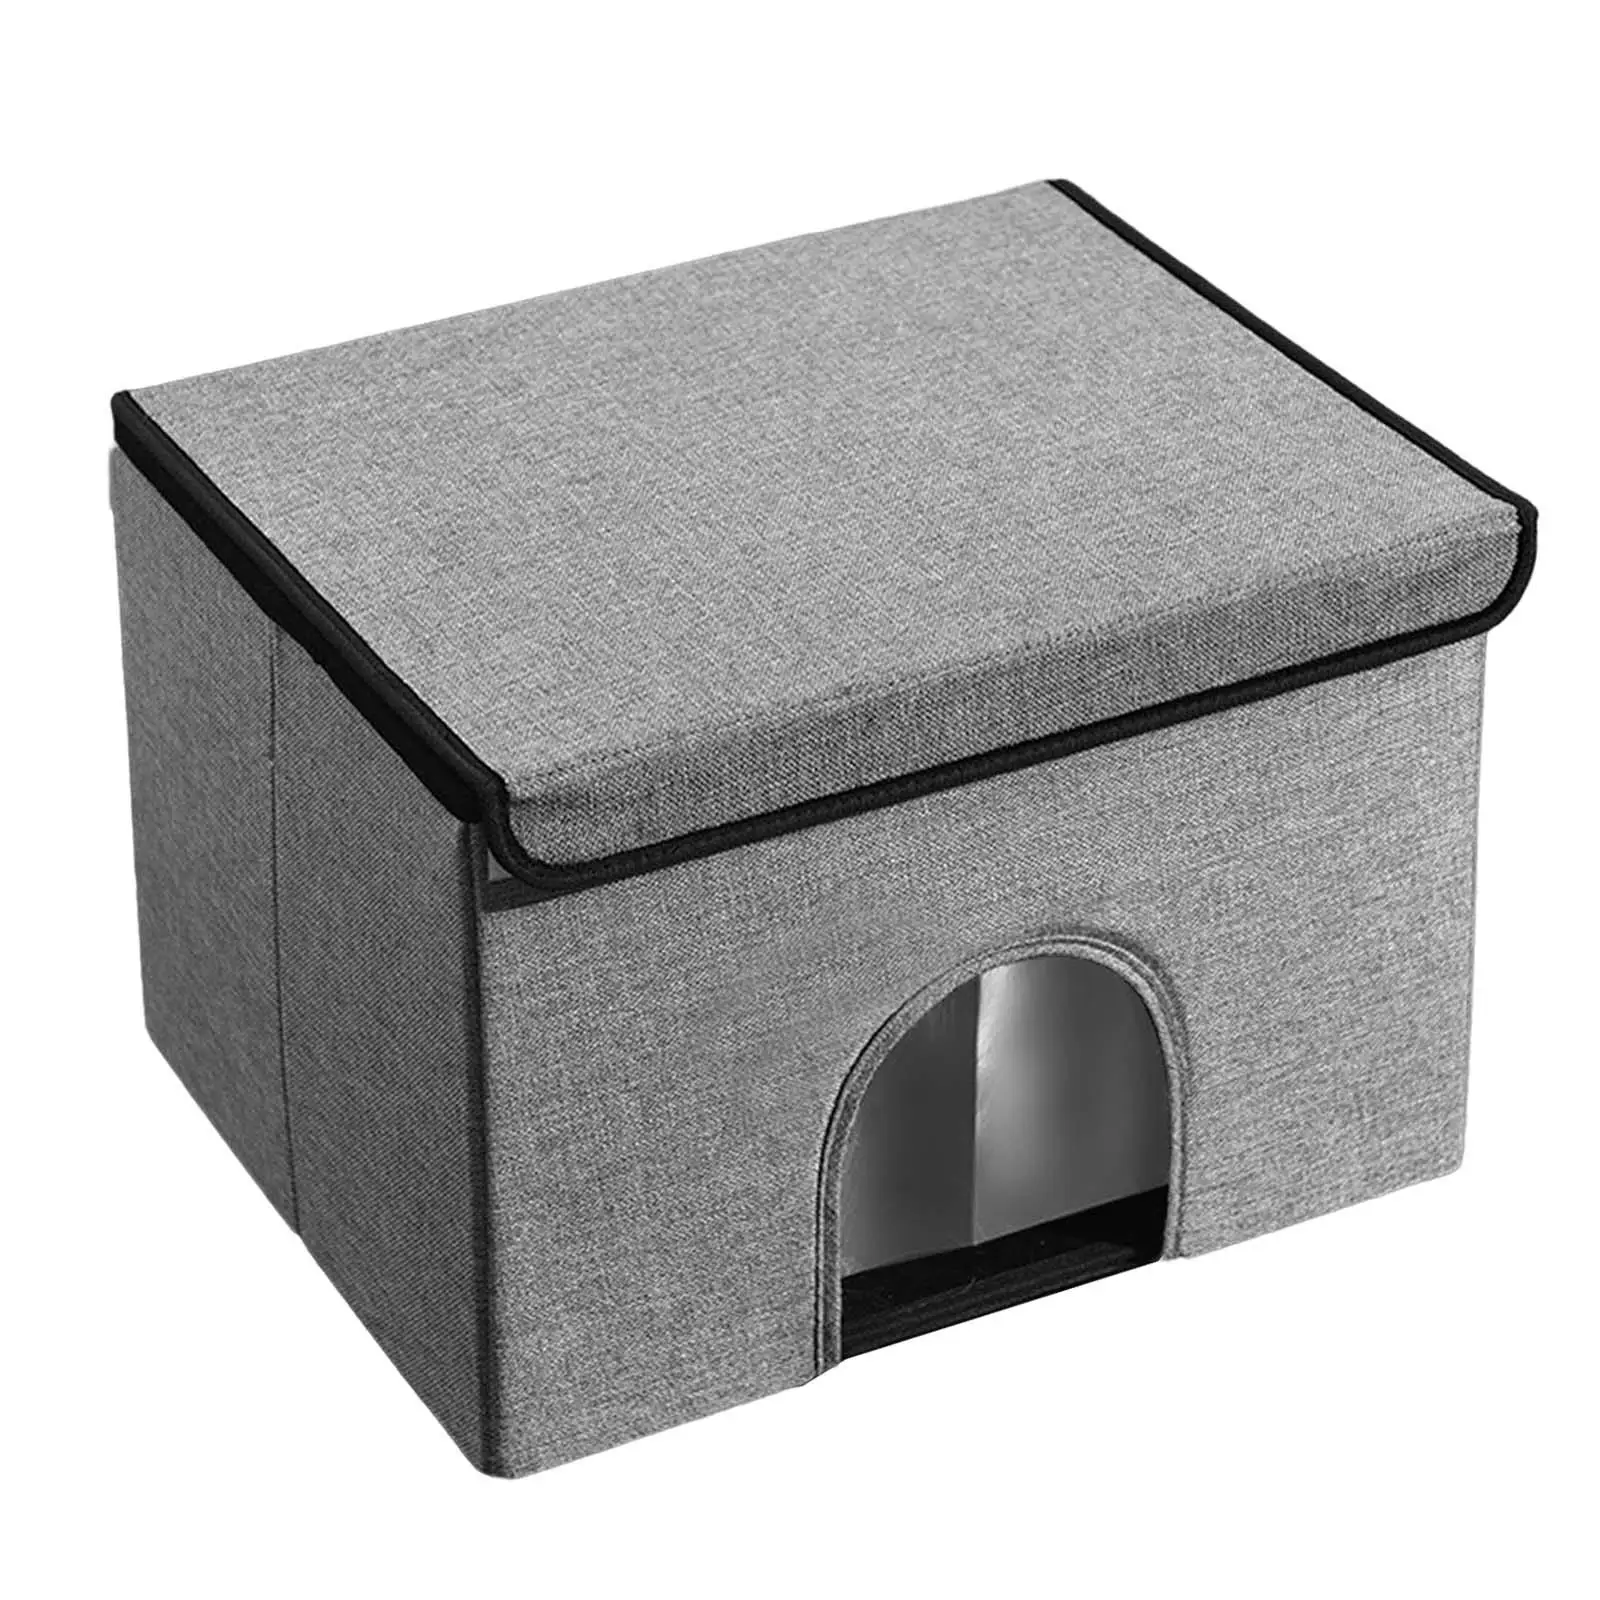 Summer Cooling Cat House Cat Bed with Freezer Packs Internal Aluminum Foil Layer Versatile 19.7x15.7x13.8inch for Small Animals